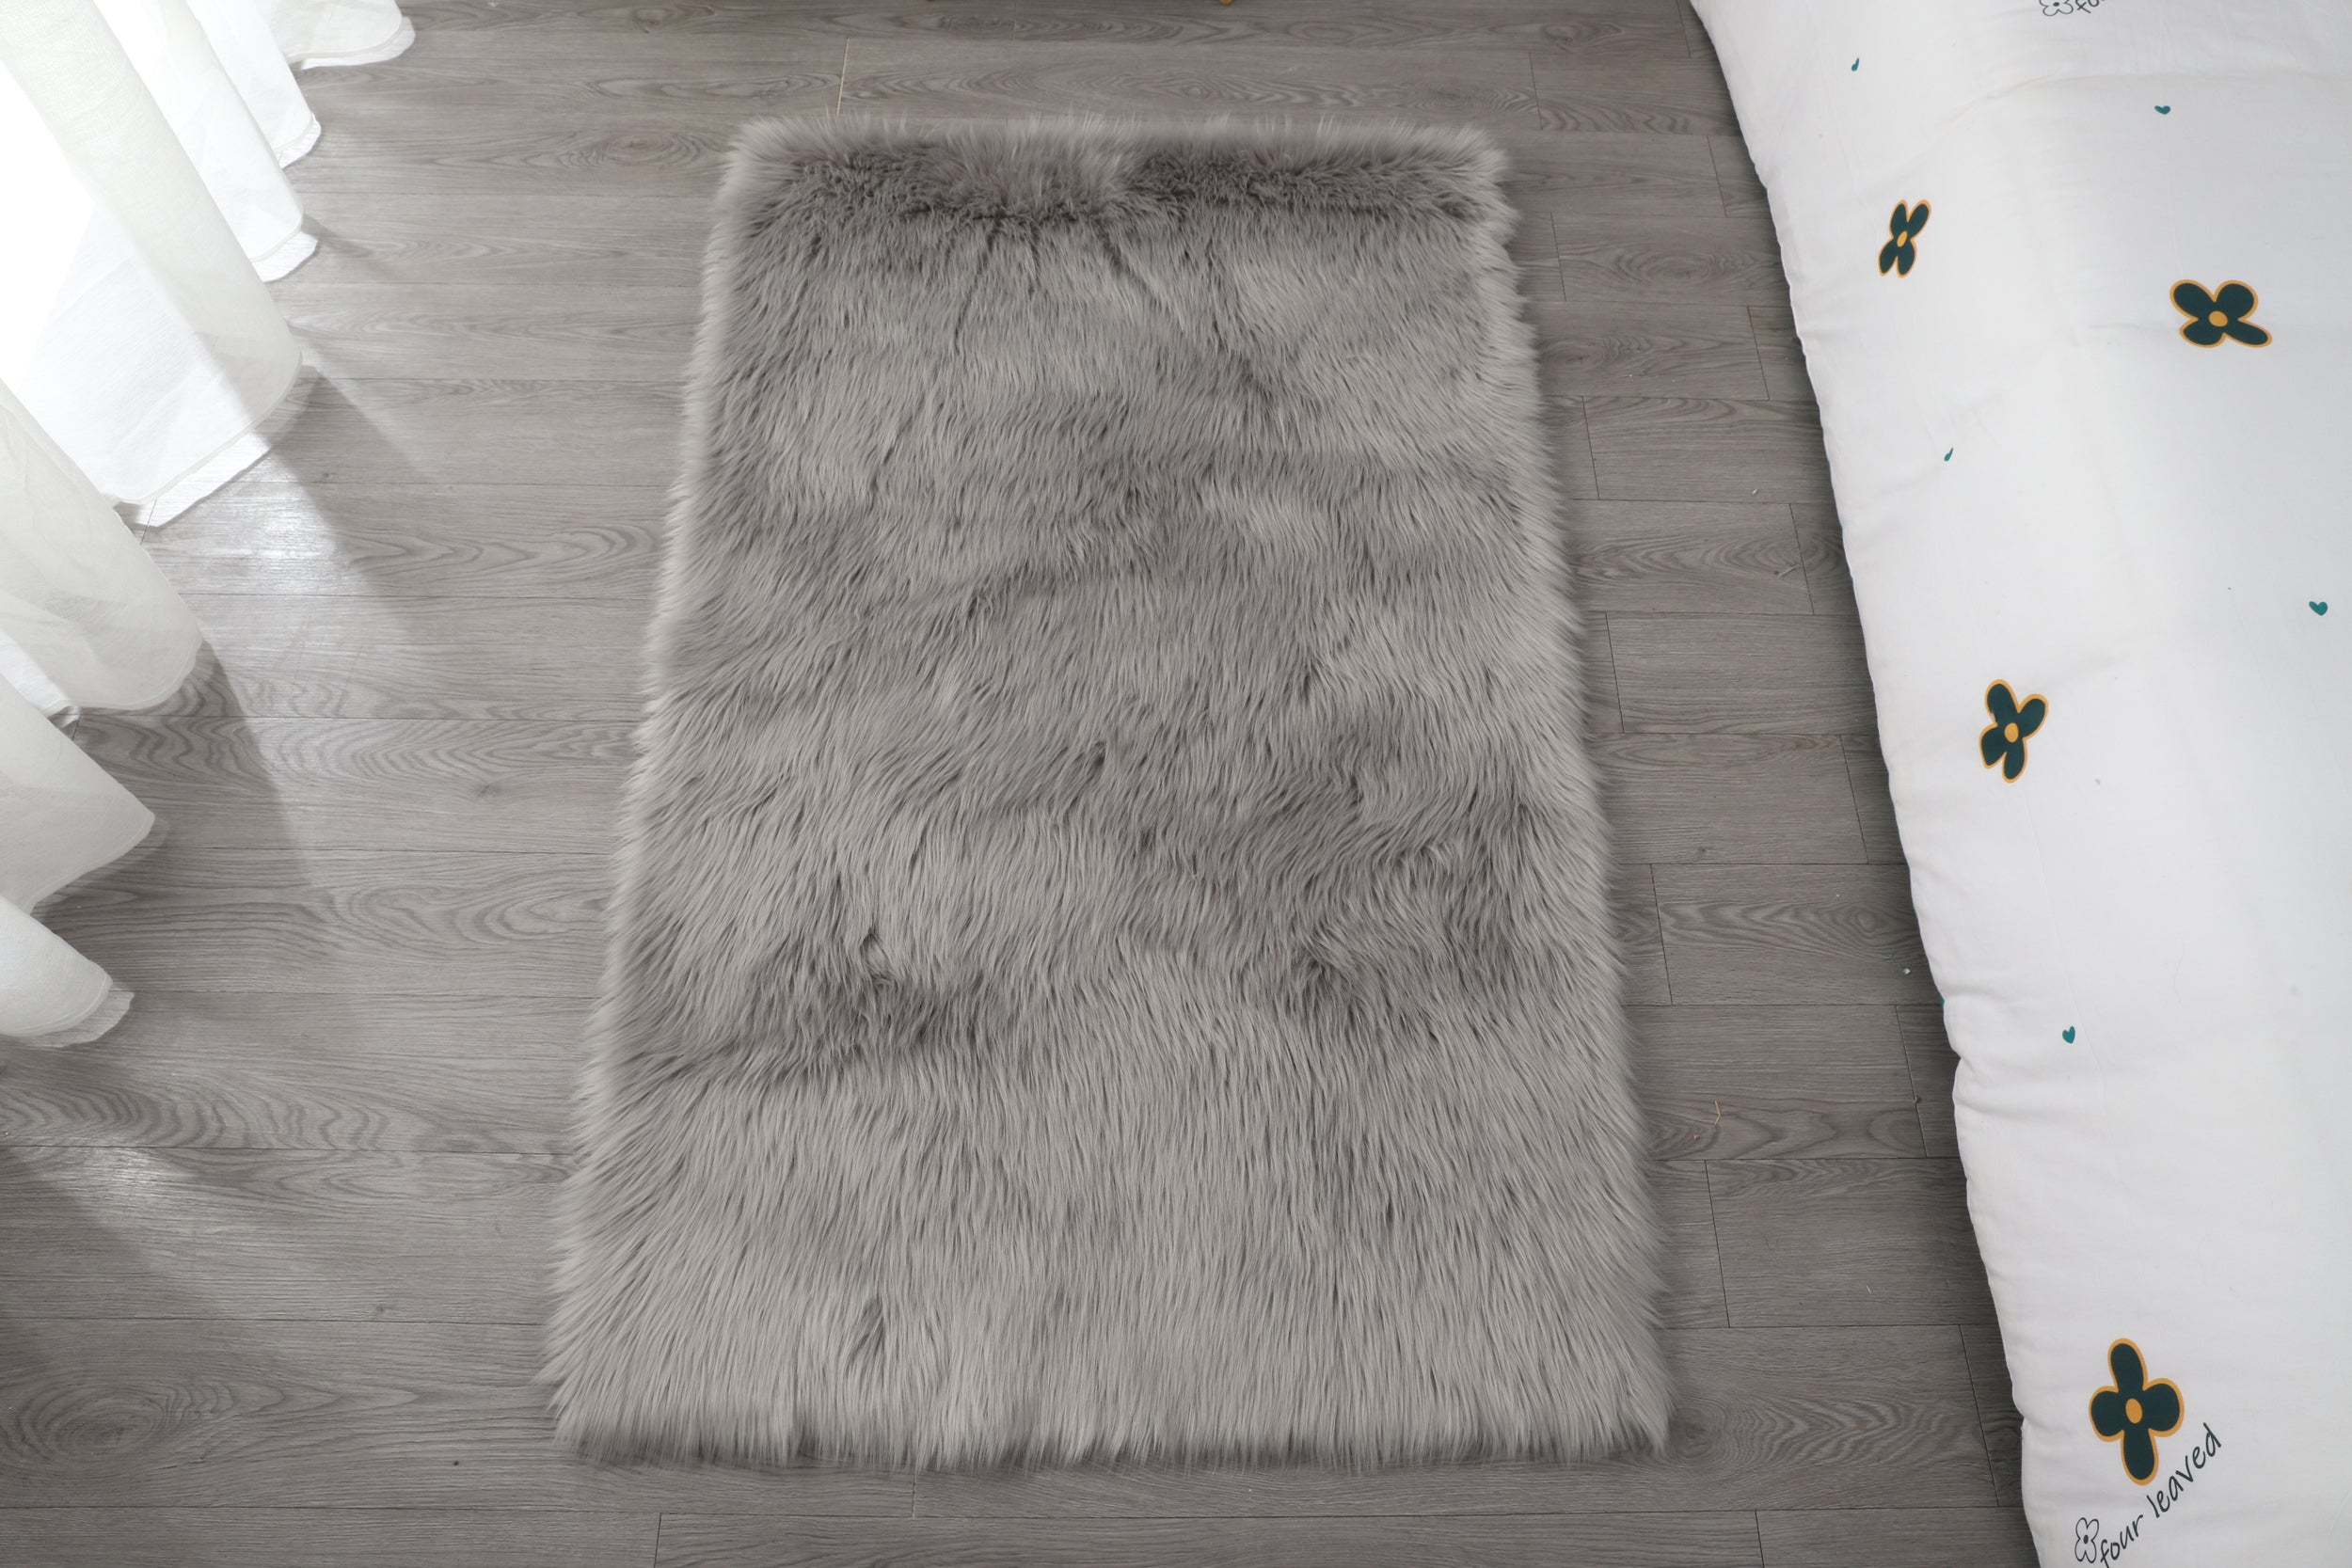 5' x 2.96' Cozy Collection Ultra Soft Fluffy Faux Fur Sheepskin Area Rug (Gray)